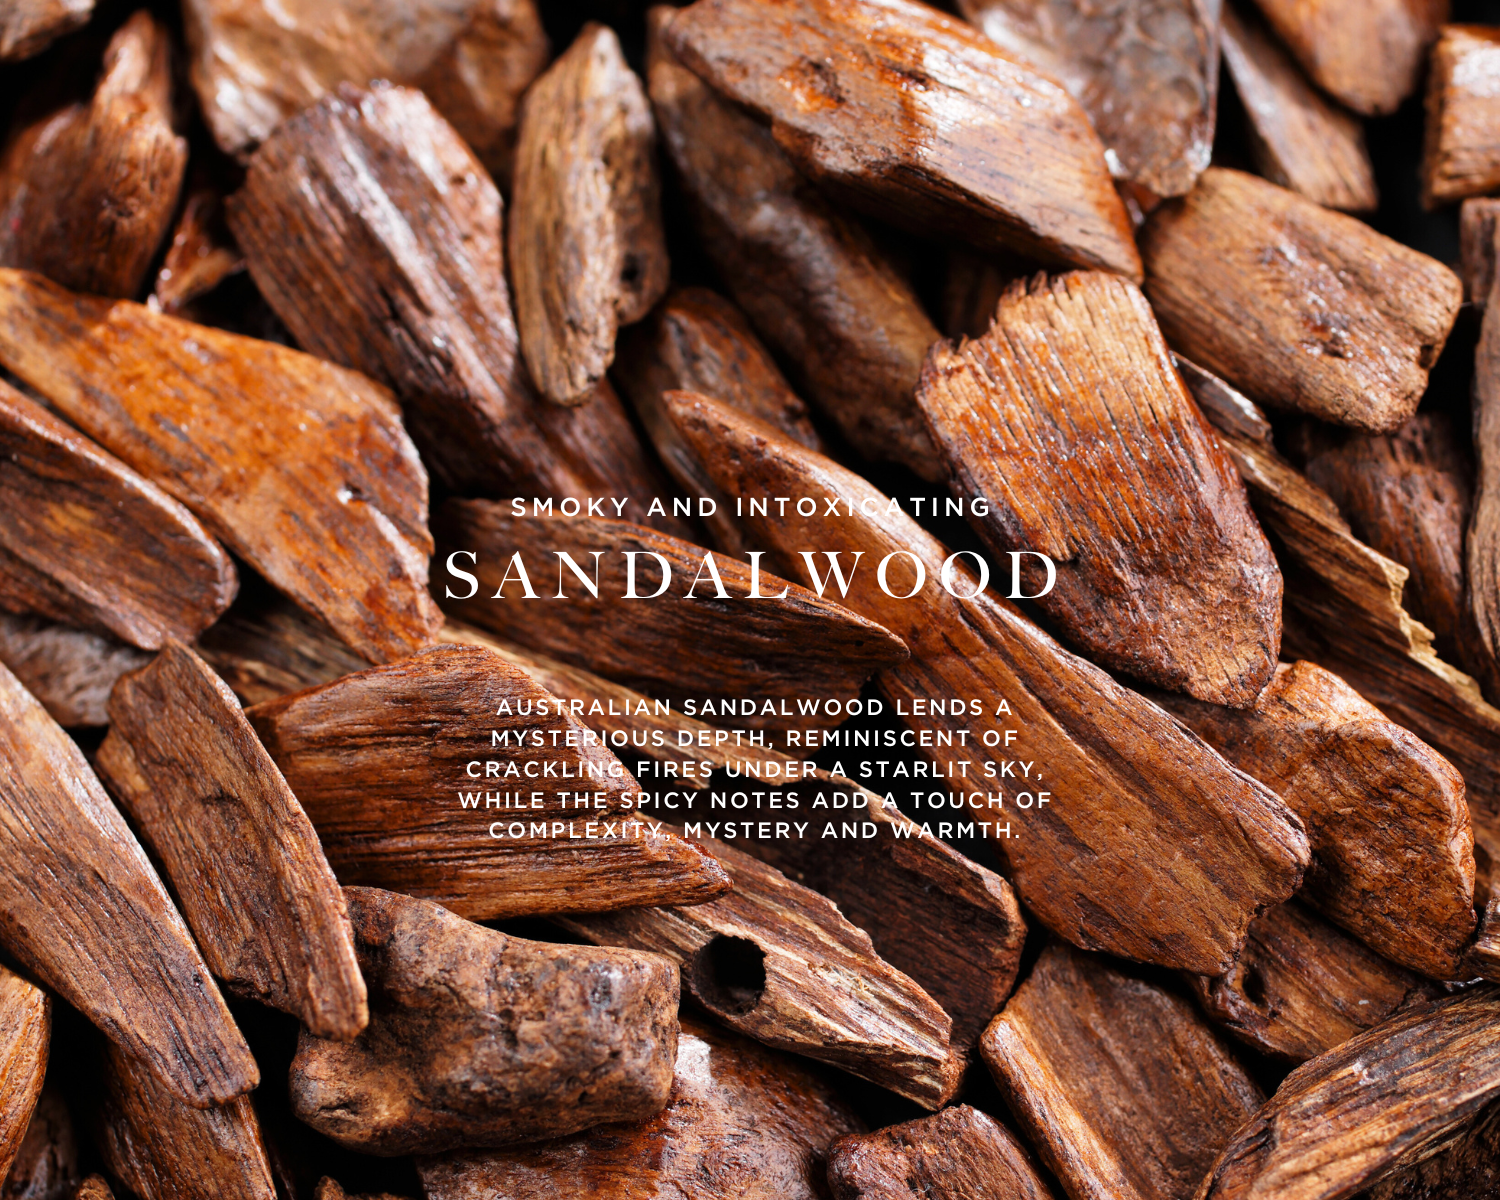 Caswell-Massey Sandalwood Eau de Toilette: image of sandalwood chips to indicate the primary scent note